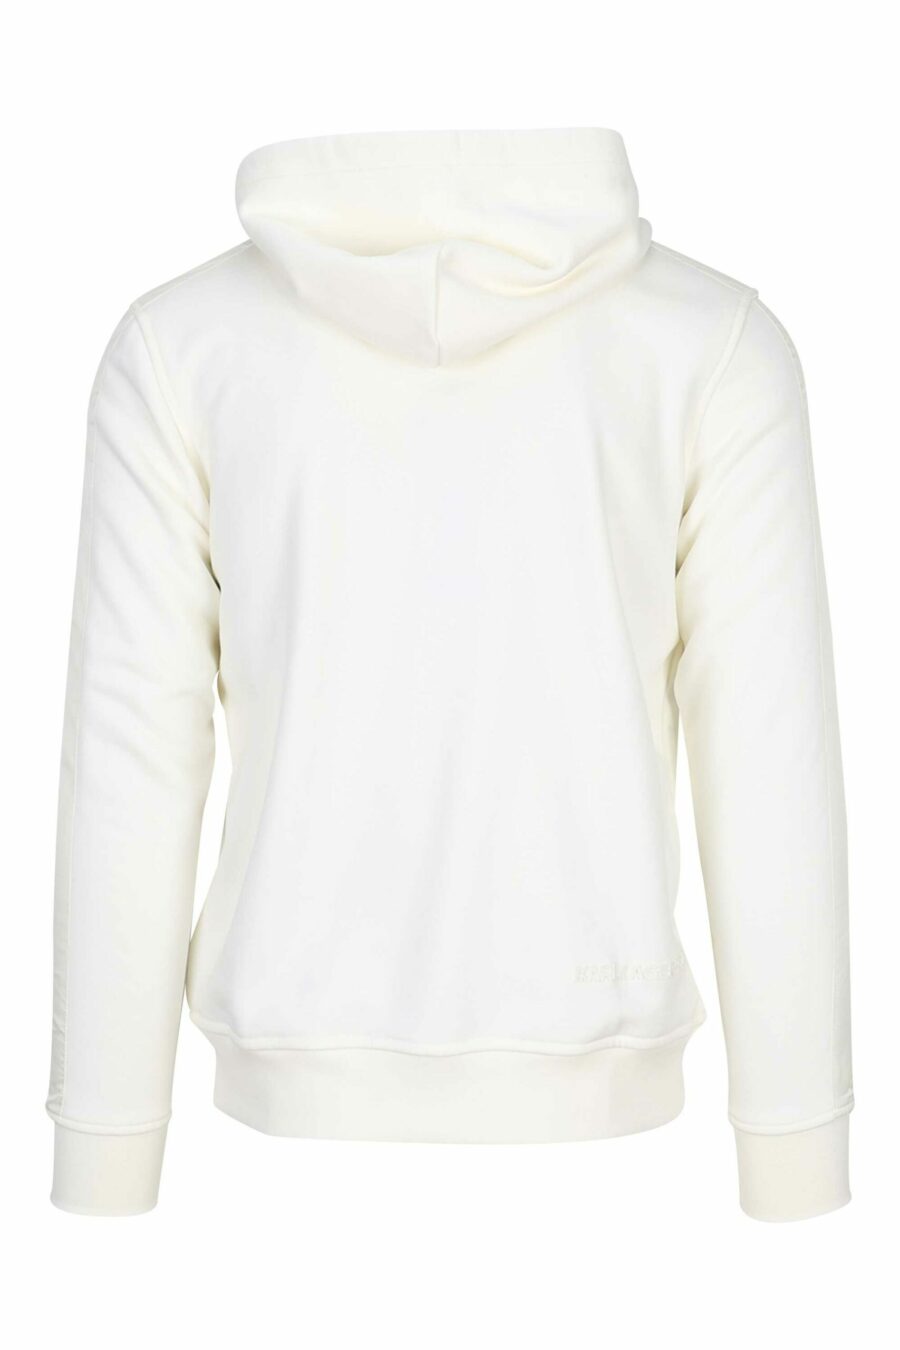 Beige hooded sweatshirt with zip and minilogue - 4062226650304 1 1 scaled